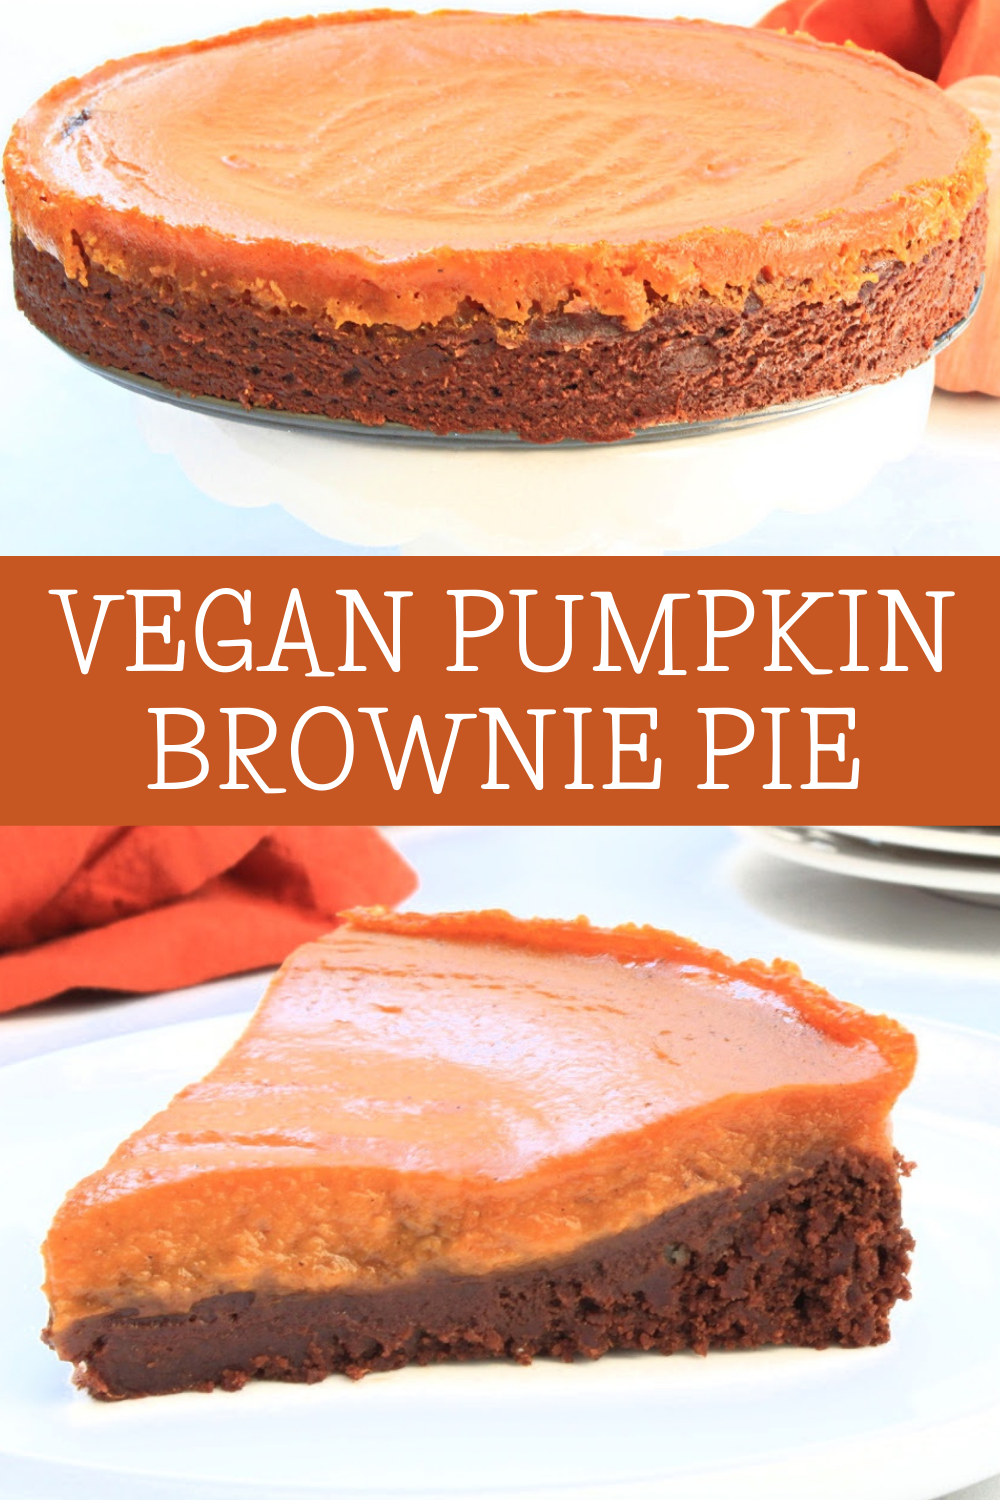 Pumpkin Brownie Pie ~ A dairy-free mashup of two favorite desserts - rich, fudgy brownies and creamy pumpkin pie! Perfect for Thanksgiving or Halloween! via @thiswifecooks